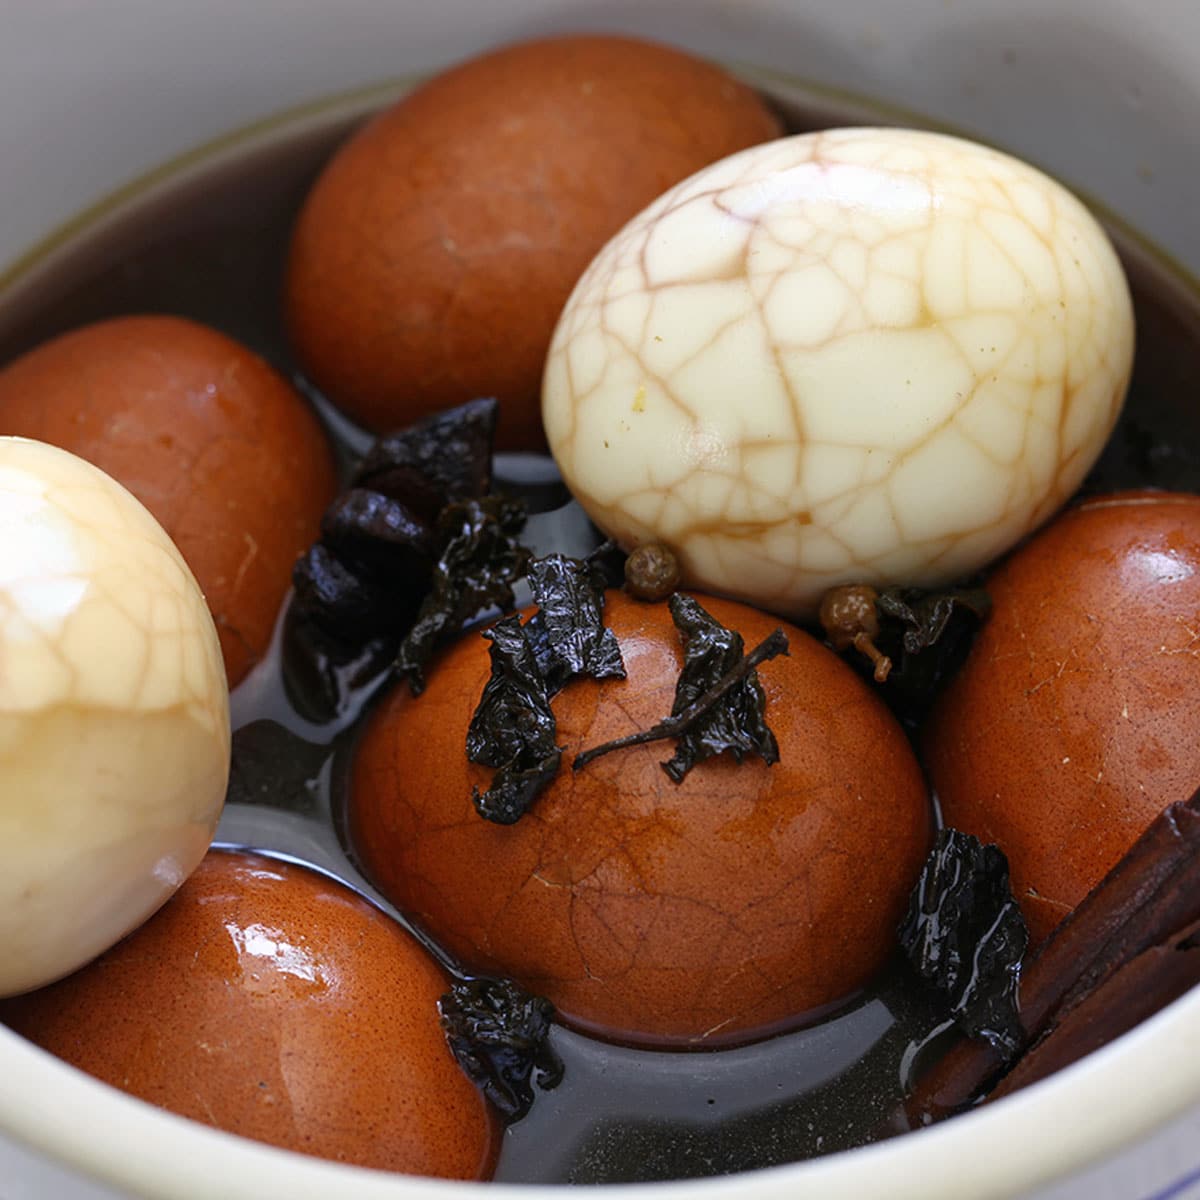 If you walk the streets of China, you will be sure to come across street vendors selling Cha Ye Dan, (茶叶蛋 /茶葉蛋)or Chinese Tea Eggs or Marbled eggs.